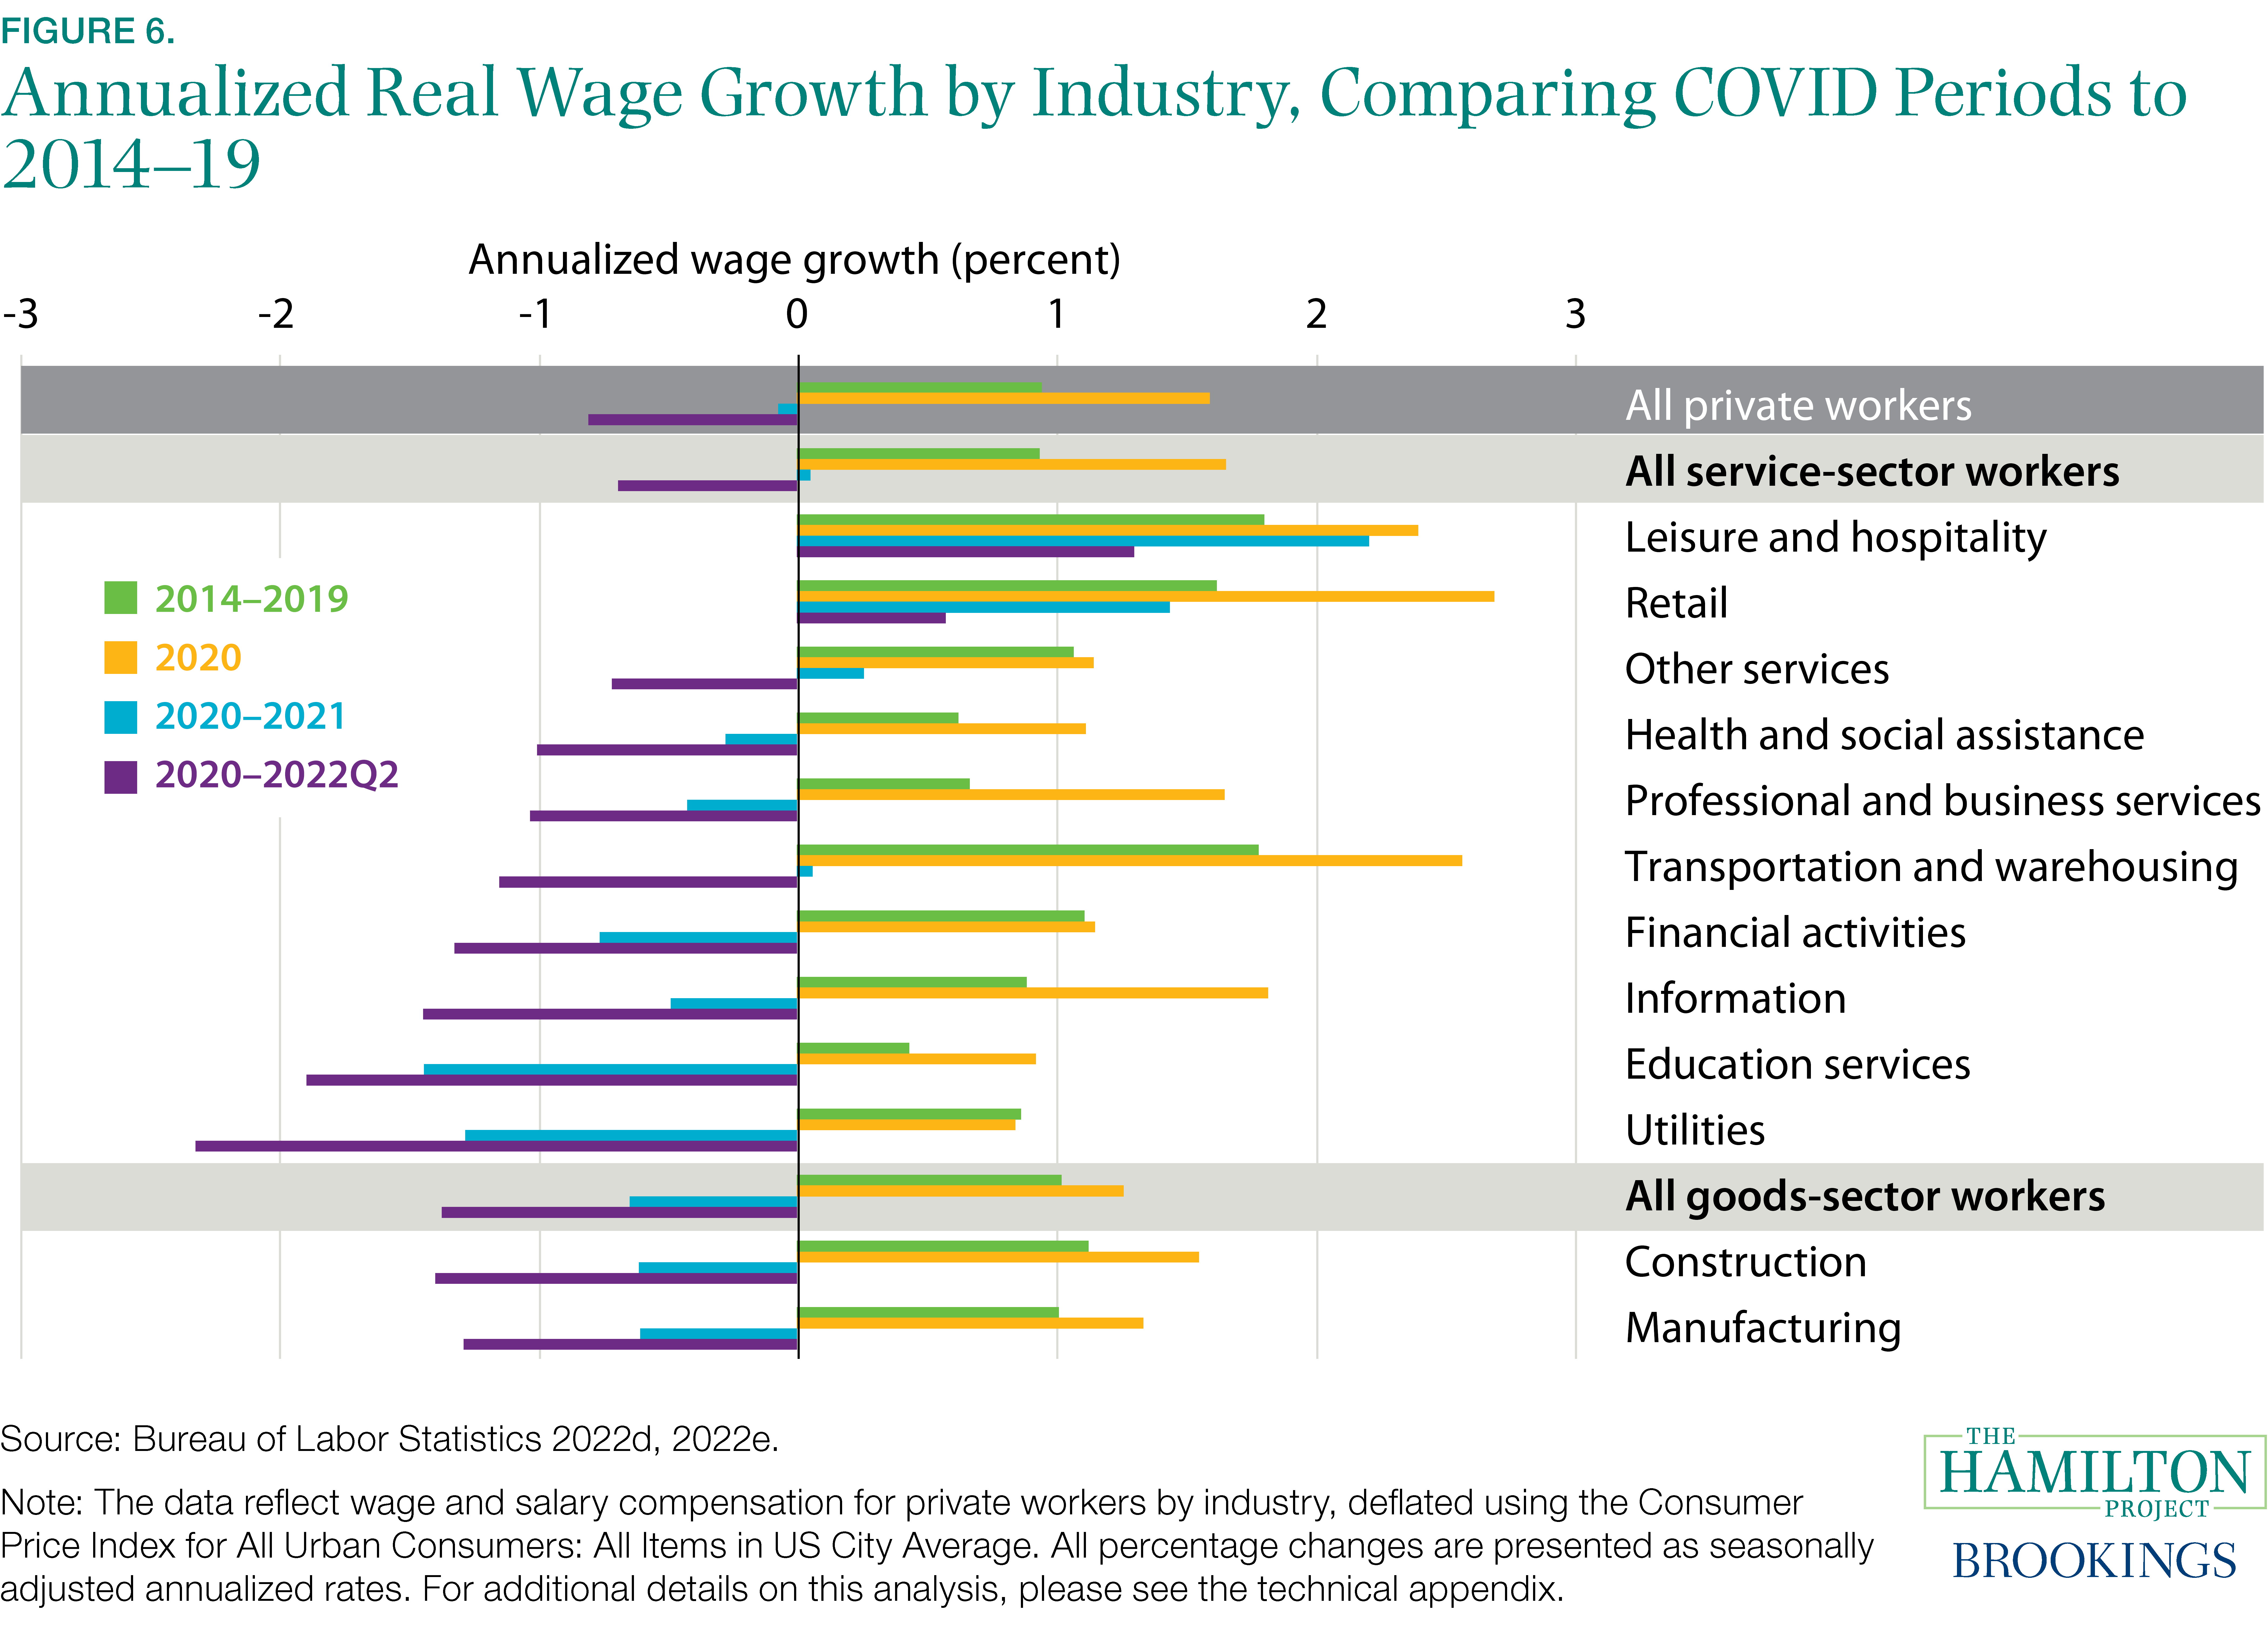 Figure 6. Annualized Real Wage Growth by Industry, Comparing COVID Periods to 2014–19 